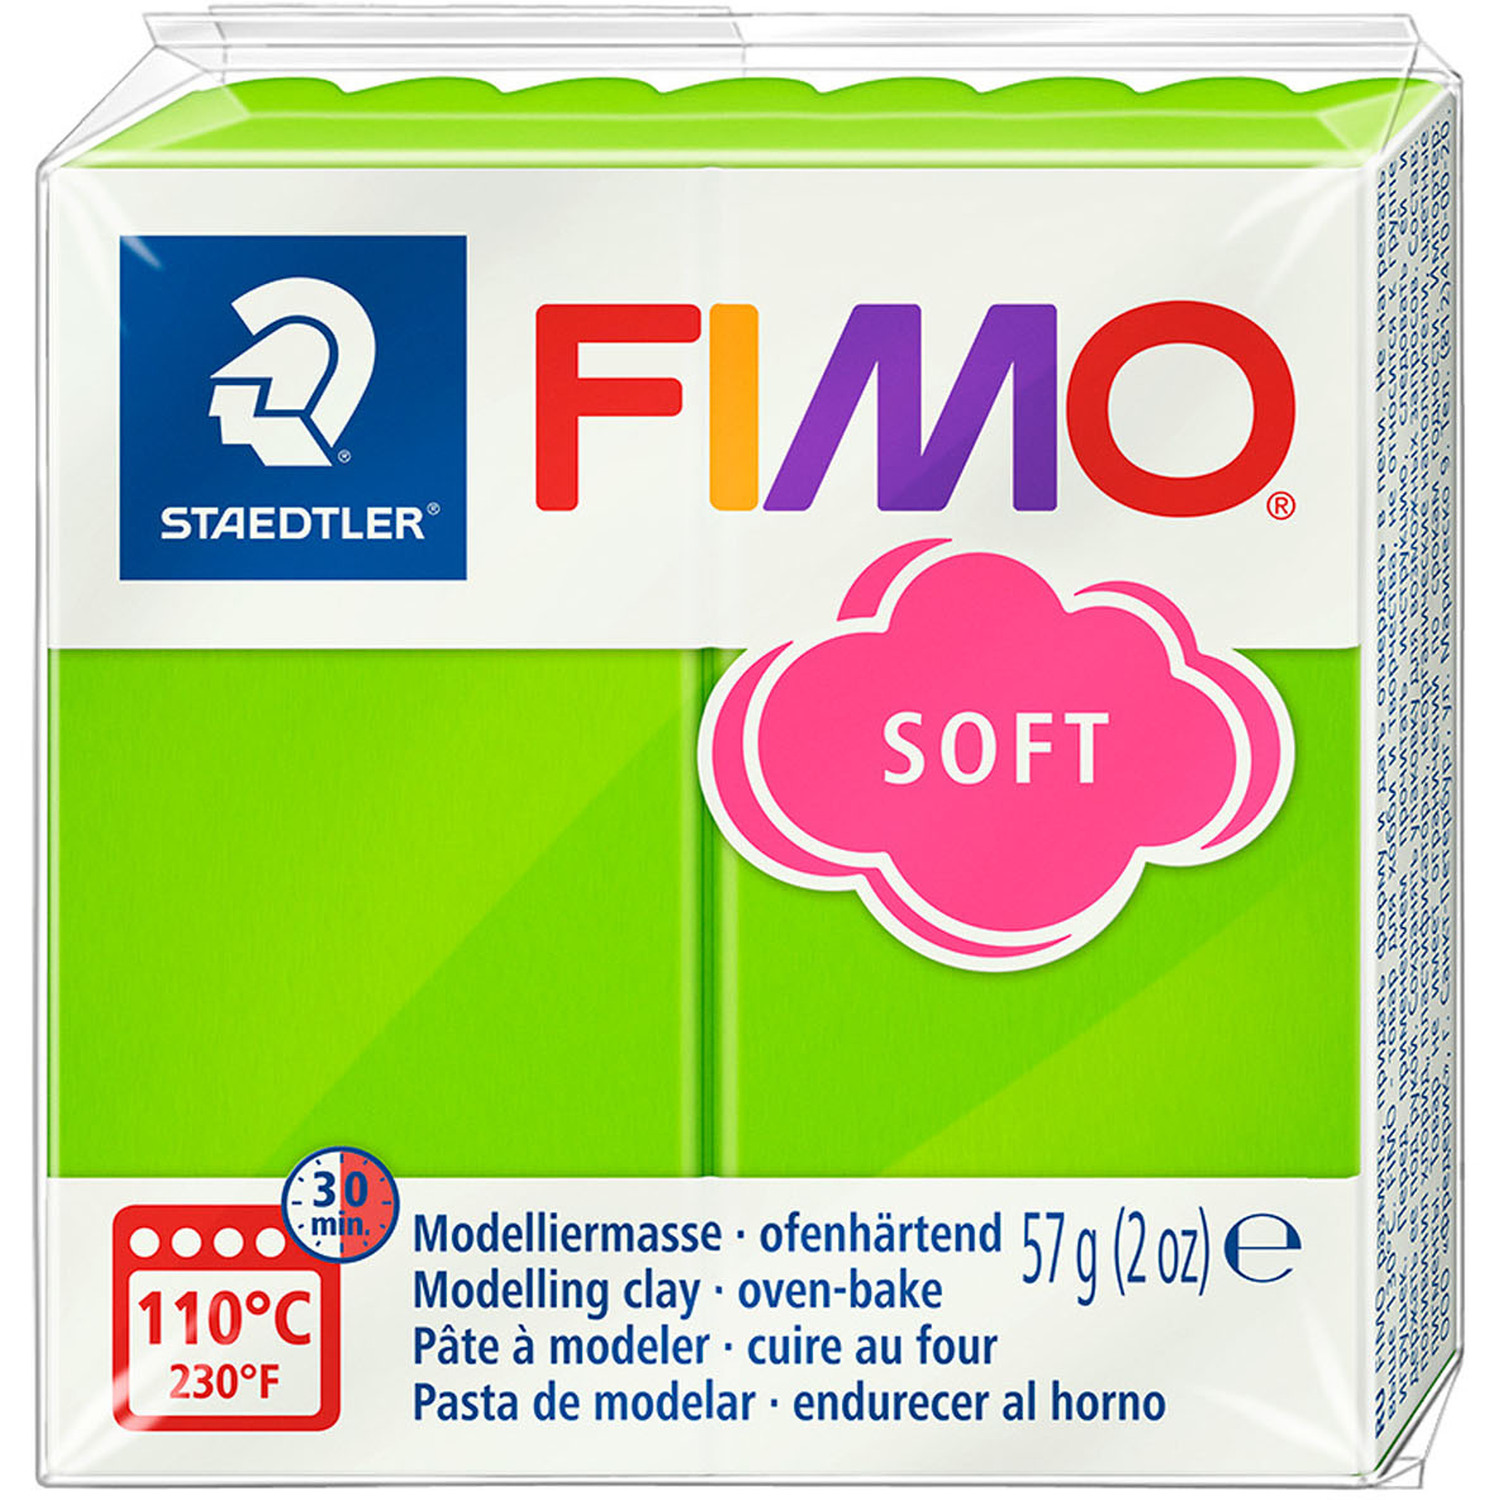 Staedtler FIMO Soft Modelling Clay Block - Apple Green Image 1